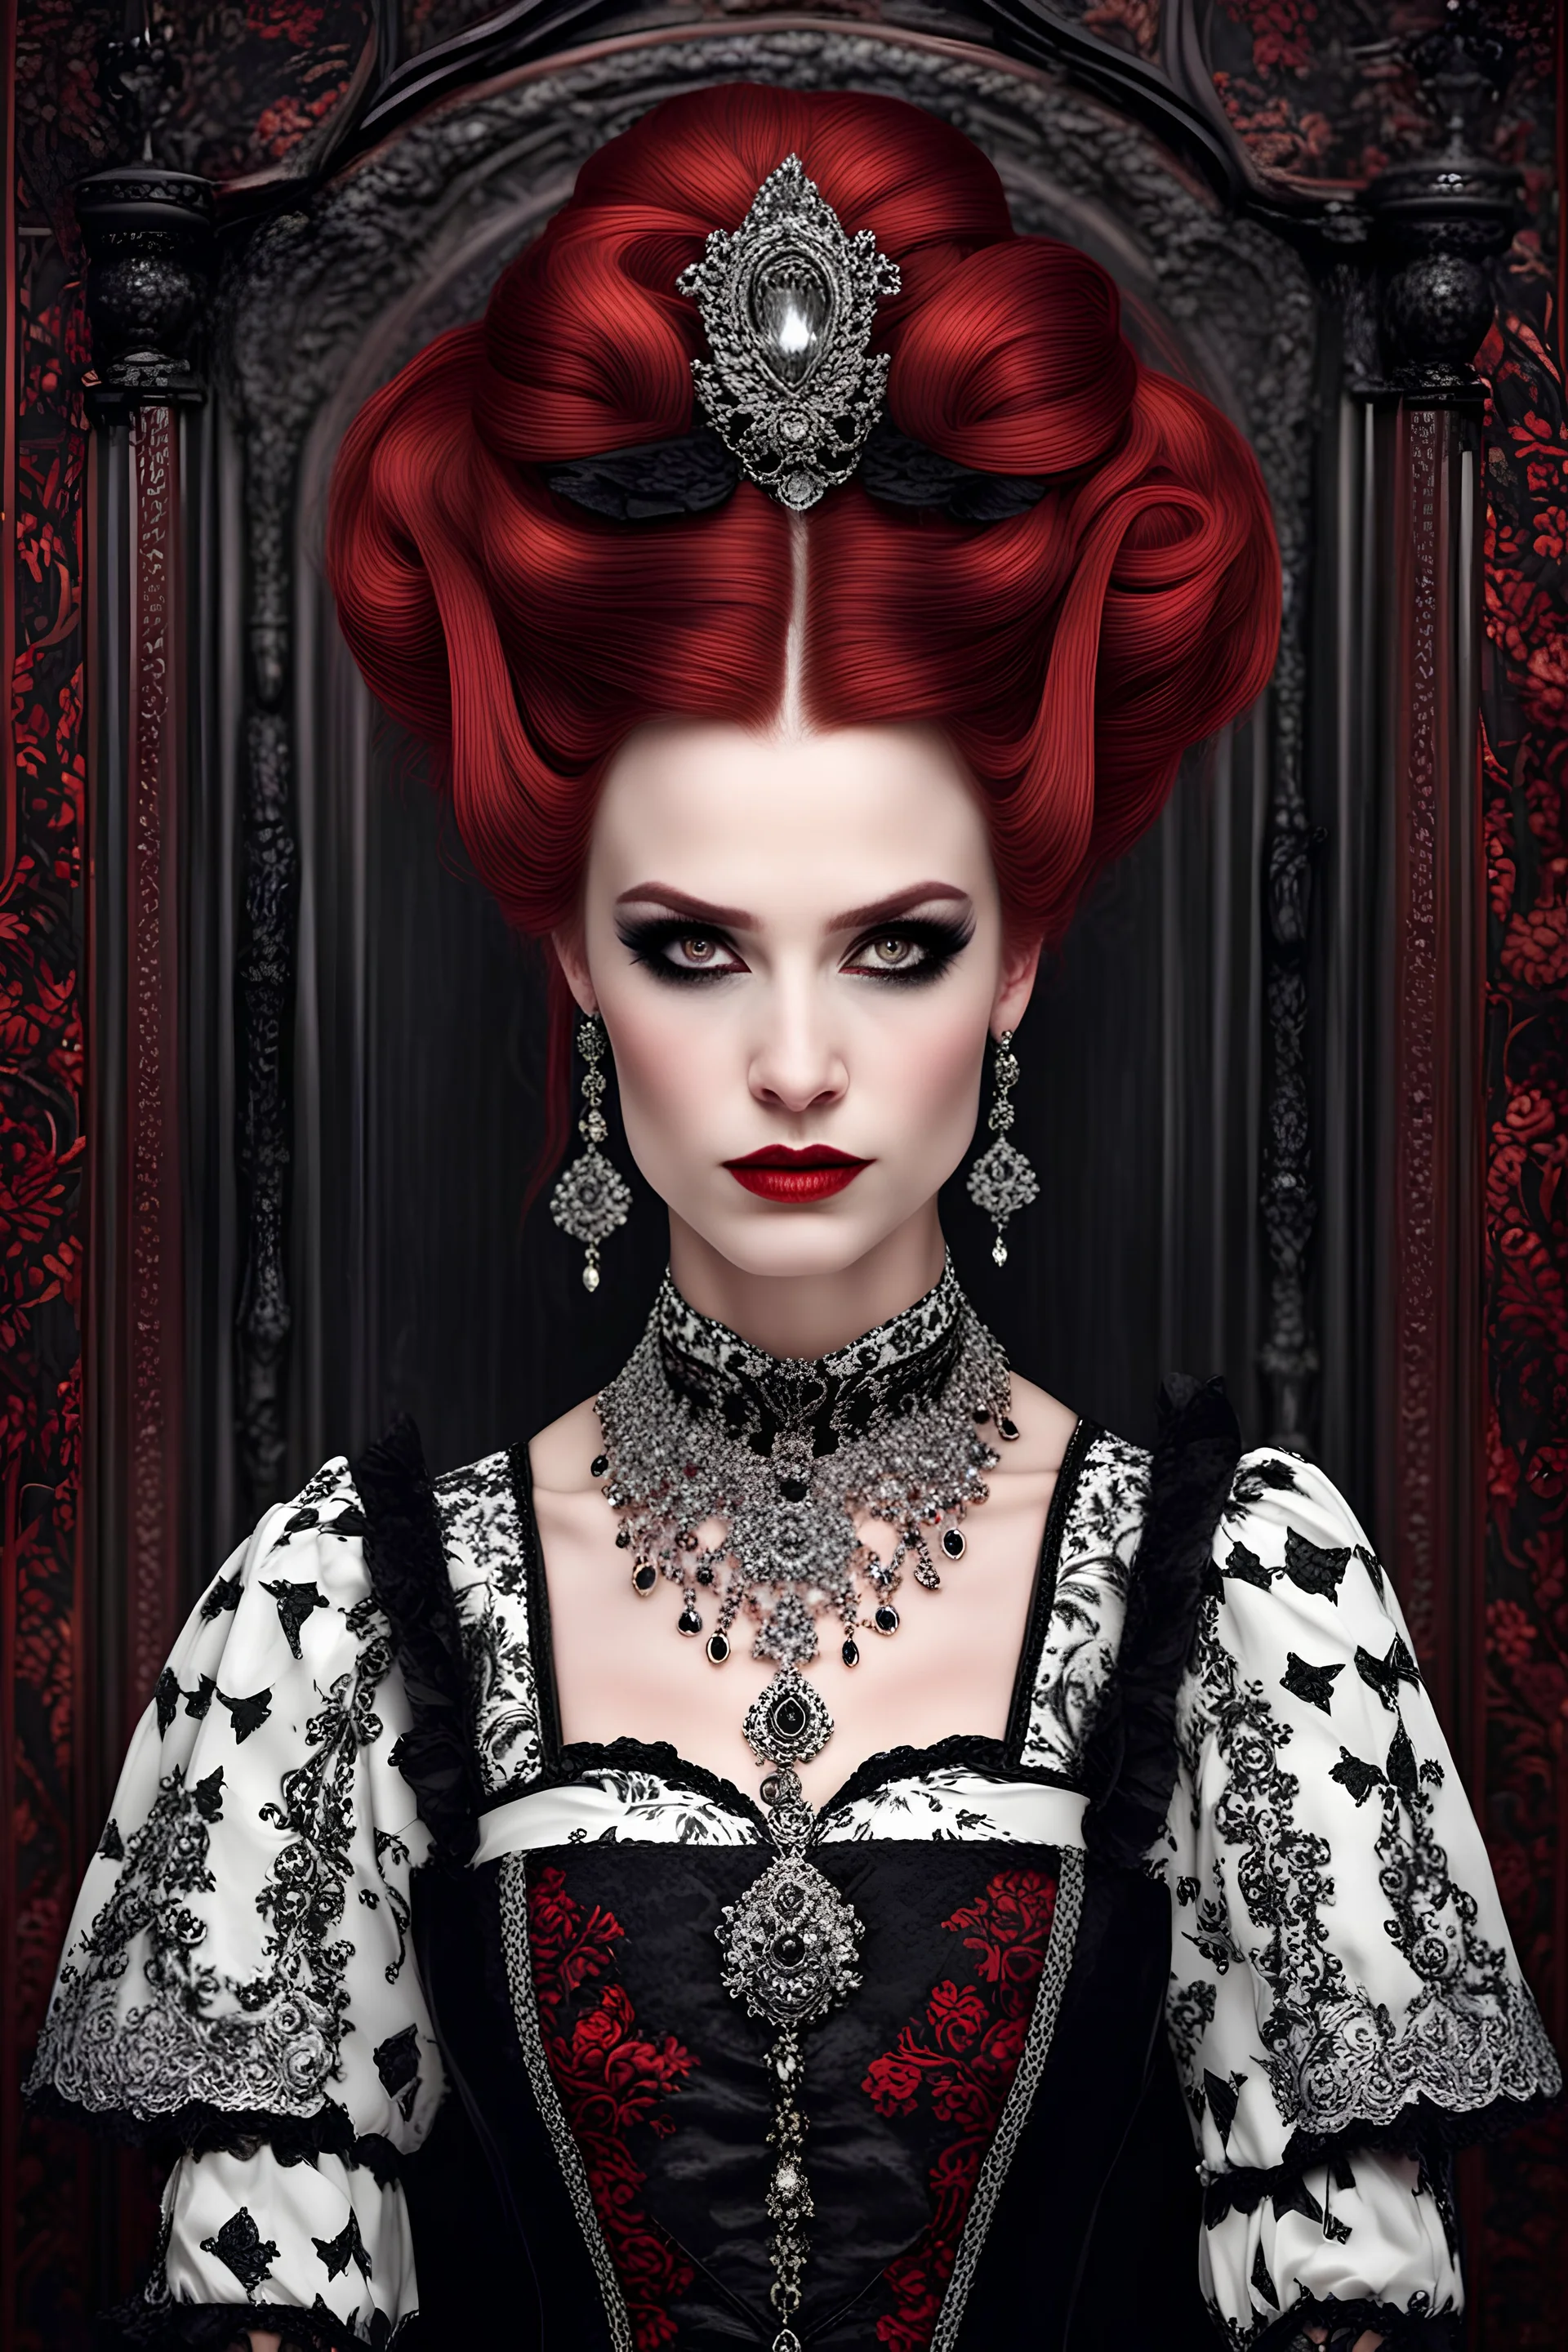 A portrait of gothic countess, she is young and beautiful, malicious intent in her facial expression,her black and white dress is immaculately styled and detailed,her jewelry is red,her hair is long and styled in a complex pattern, the portrait is hanging on a wall, frame is made of dark wood in immaculate gothic style,8K resolution , highly detailed, cinematic lighting, realistic skin